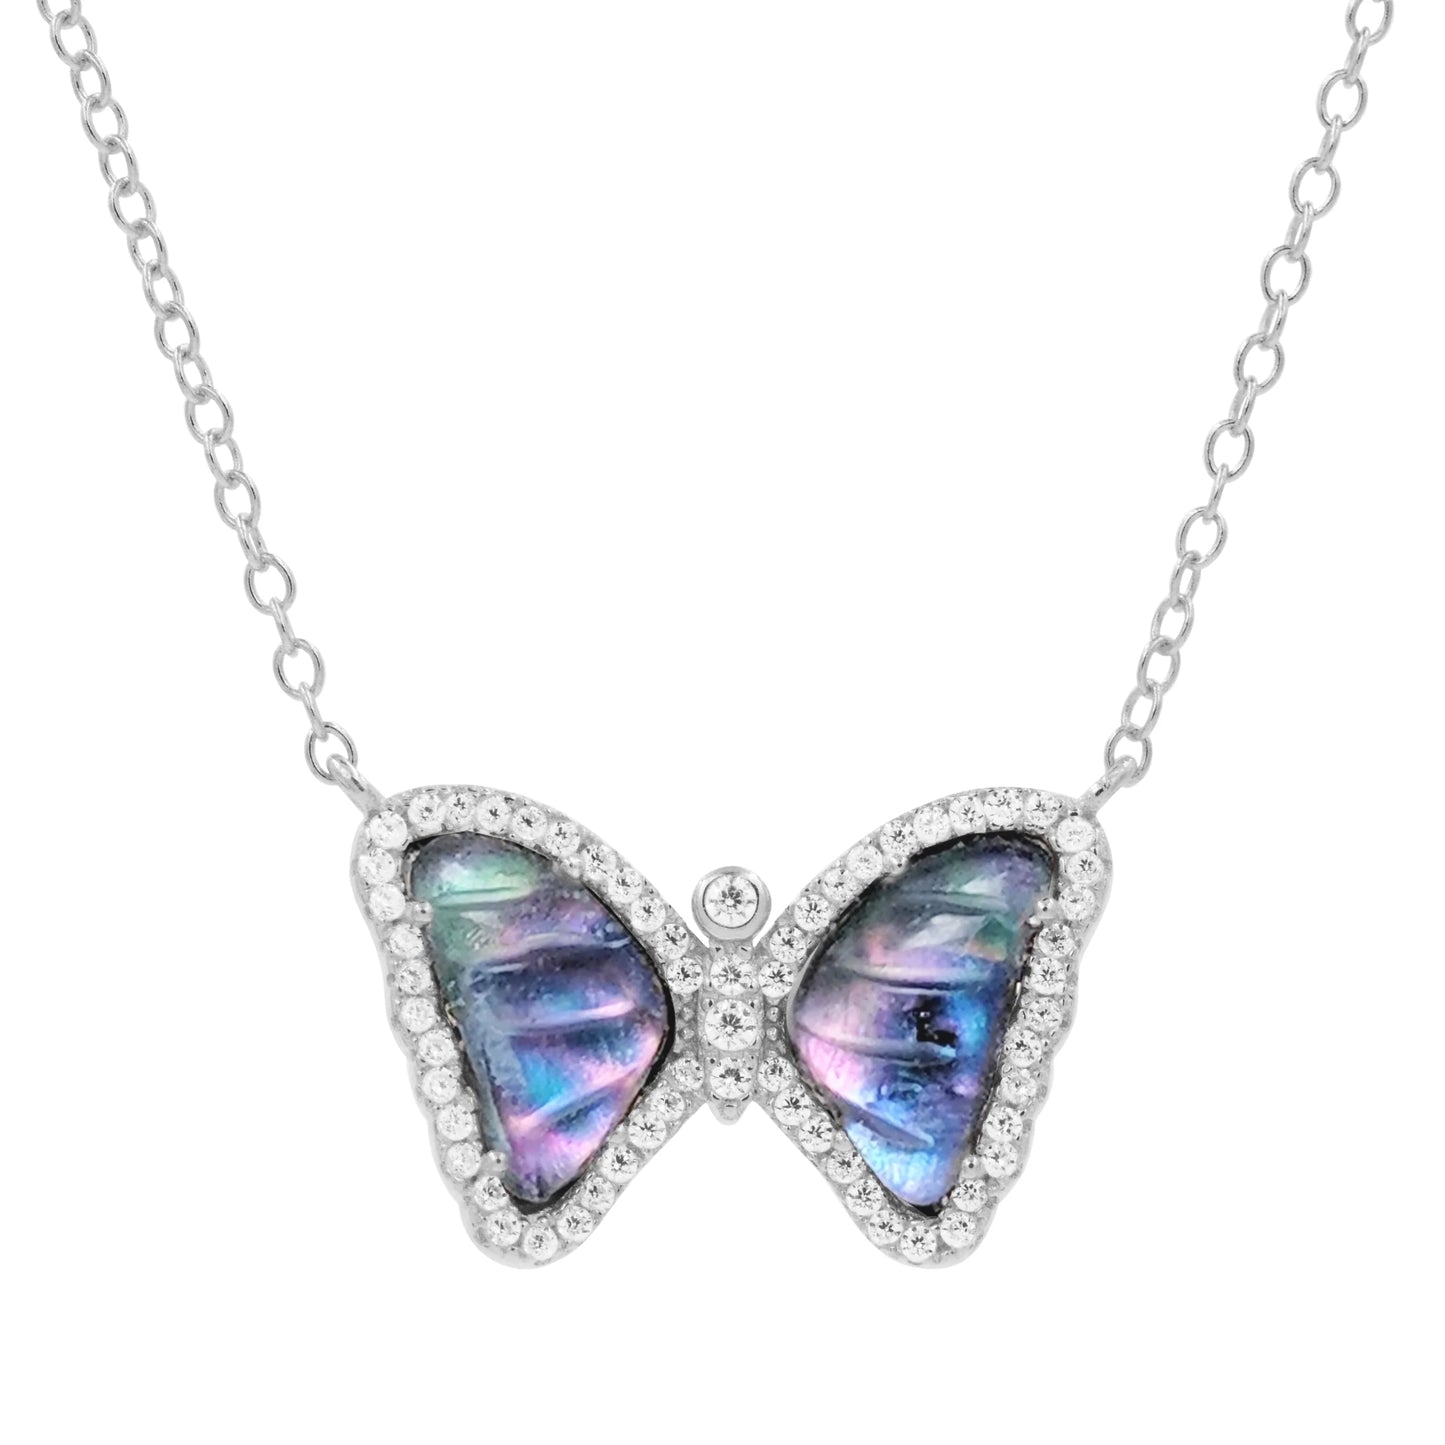 KAMARIA LIMITED EDITION MOTHER OF PEARL BUTTERFLY